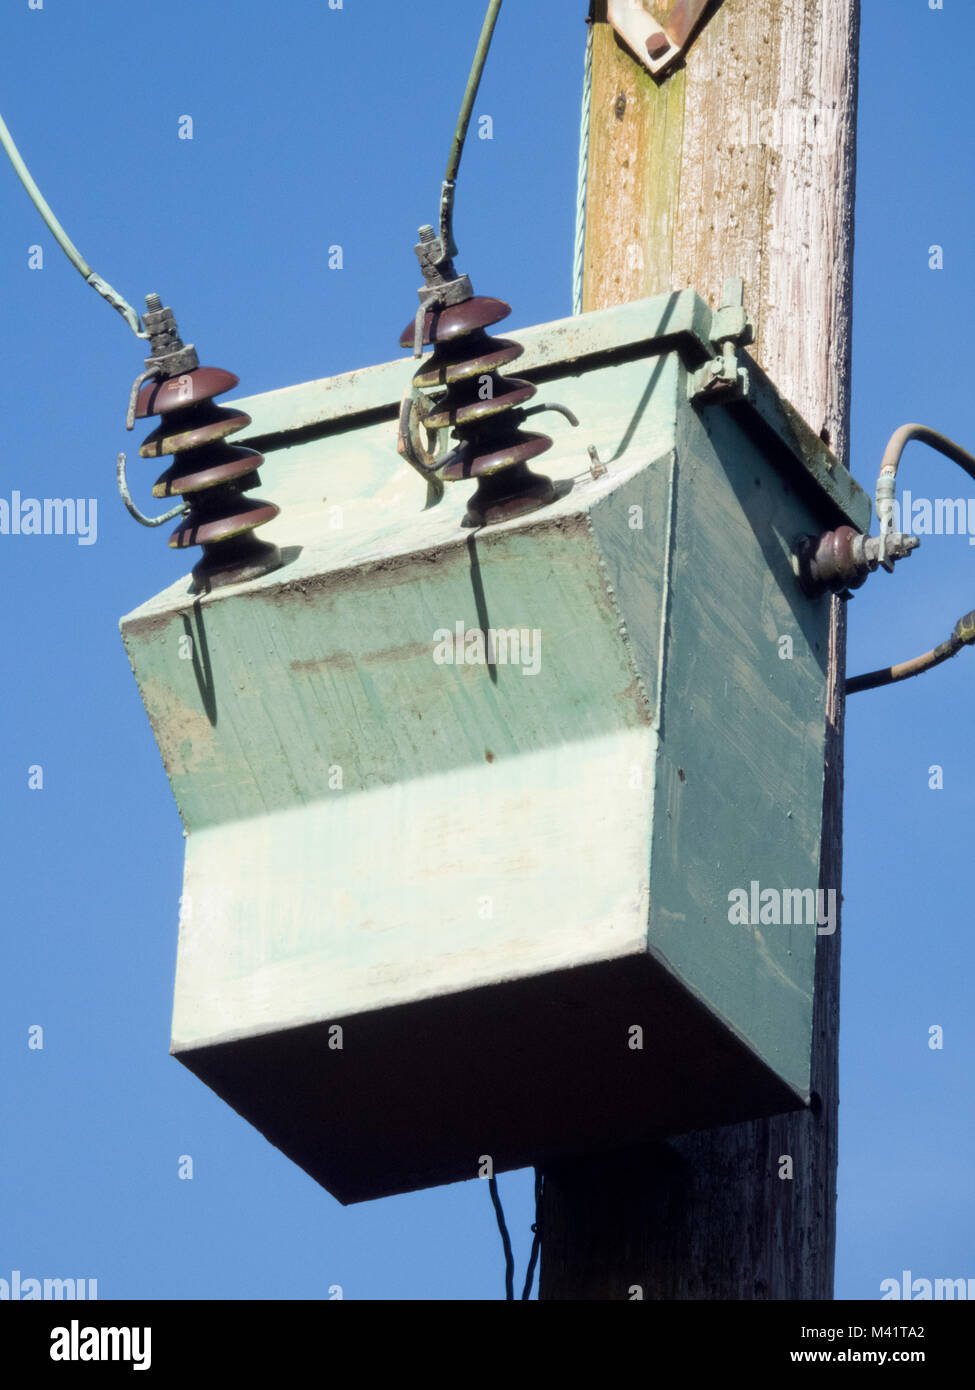 Electricity Power Transformer on a Wooden Pole, UK Stock Photo